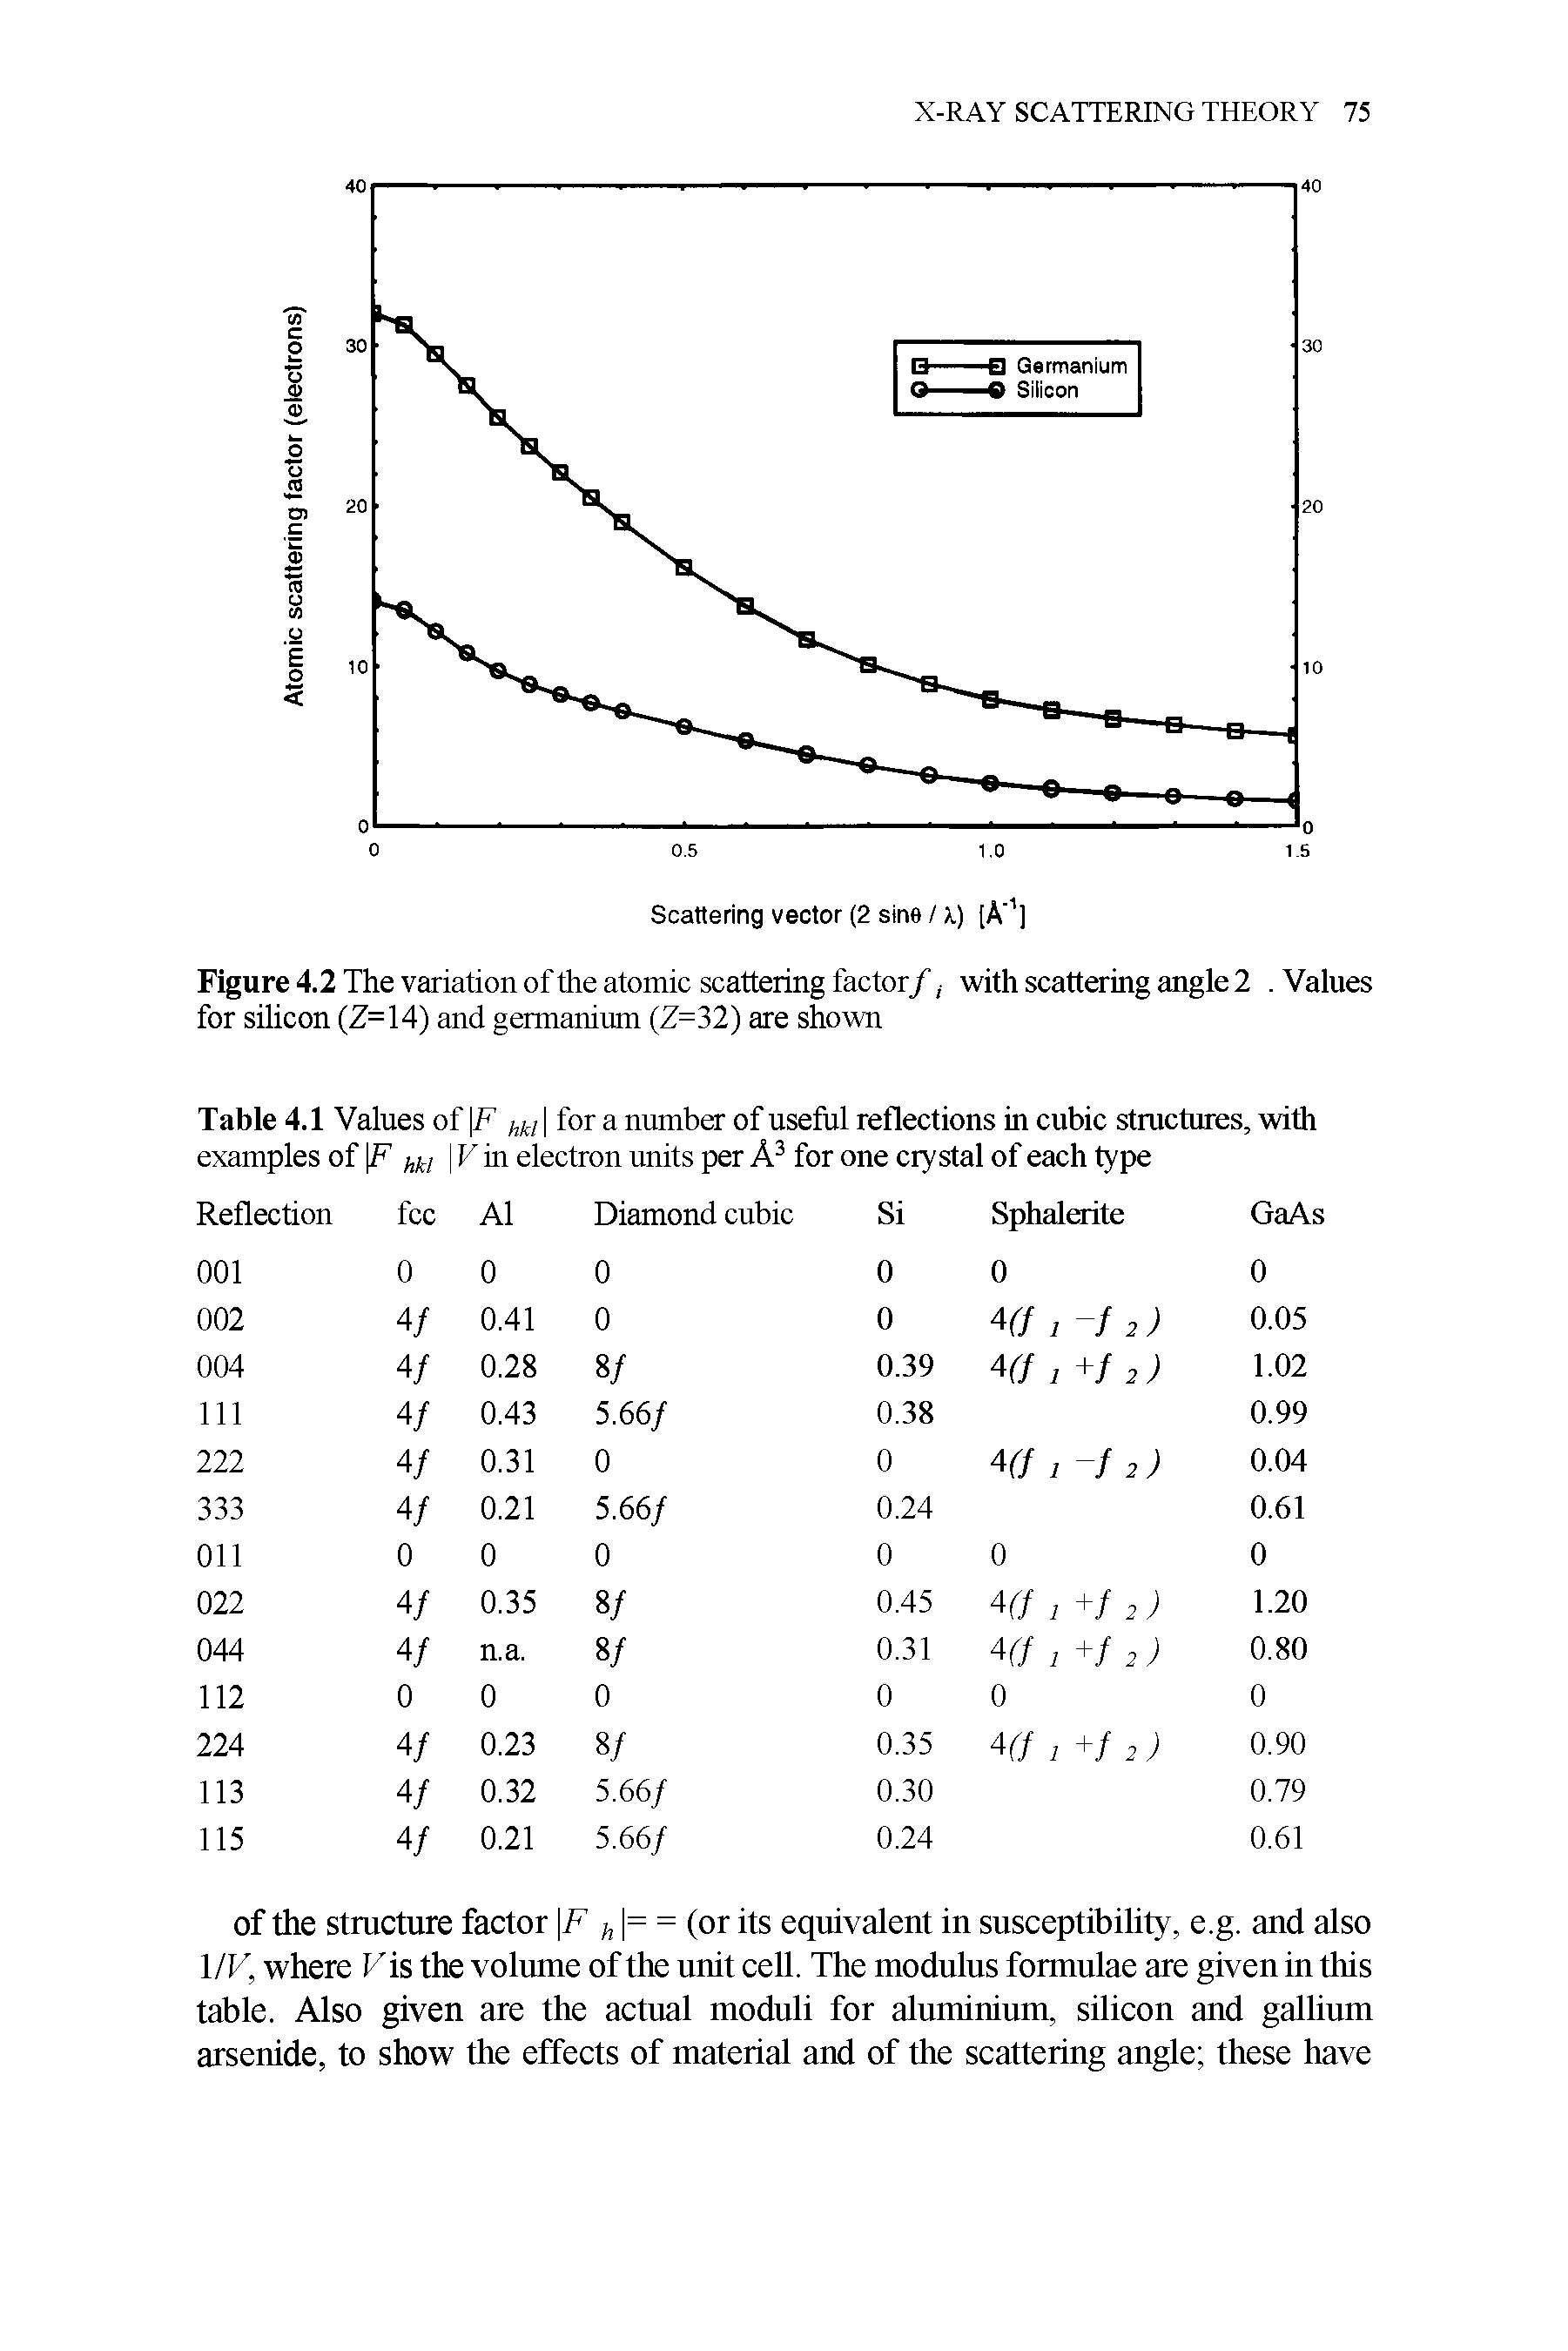 Figure 4.2 The variation of the atomic scattering factor/, with scattering angle 2. Values for silicon (Z=14) and germanium (Z=32) are shown...